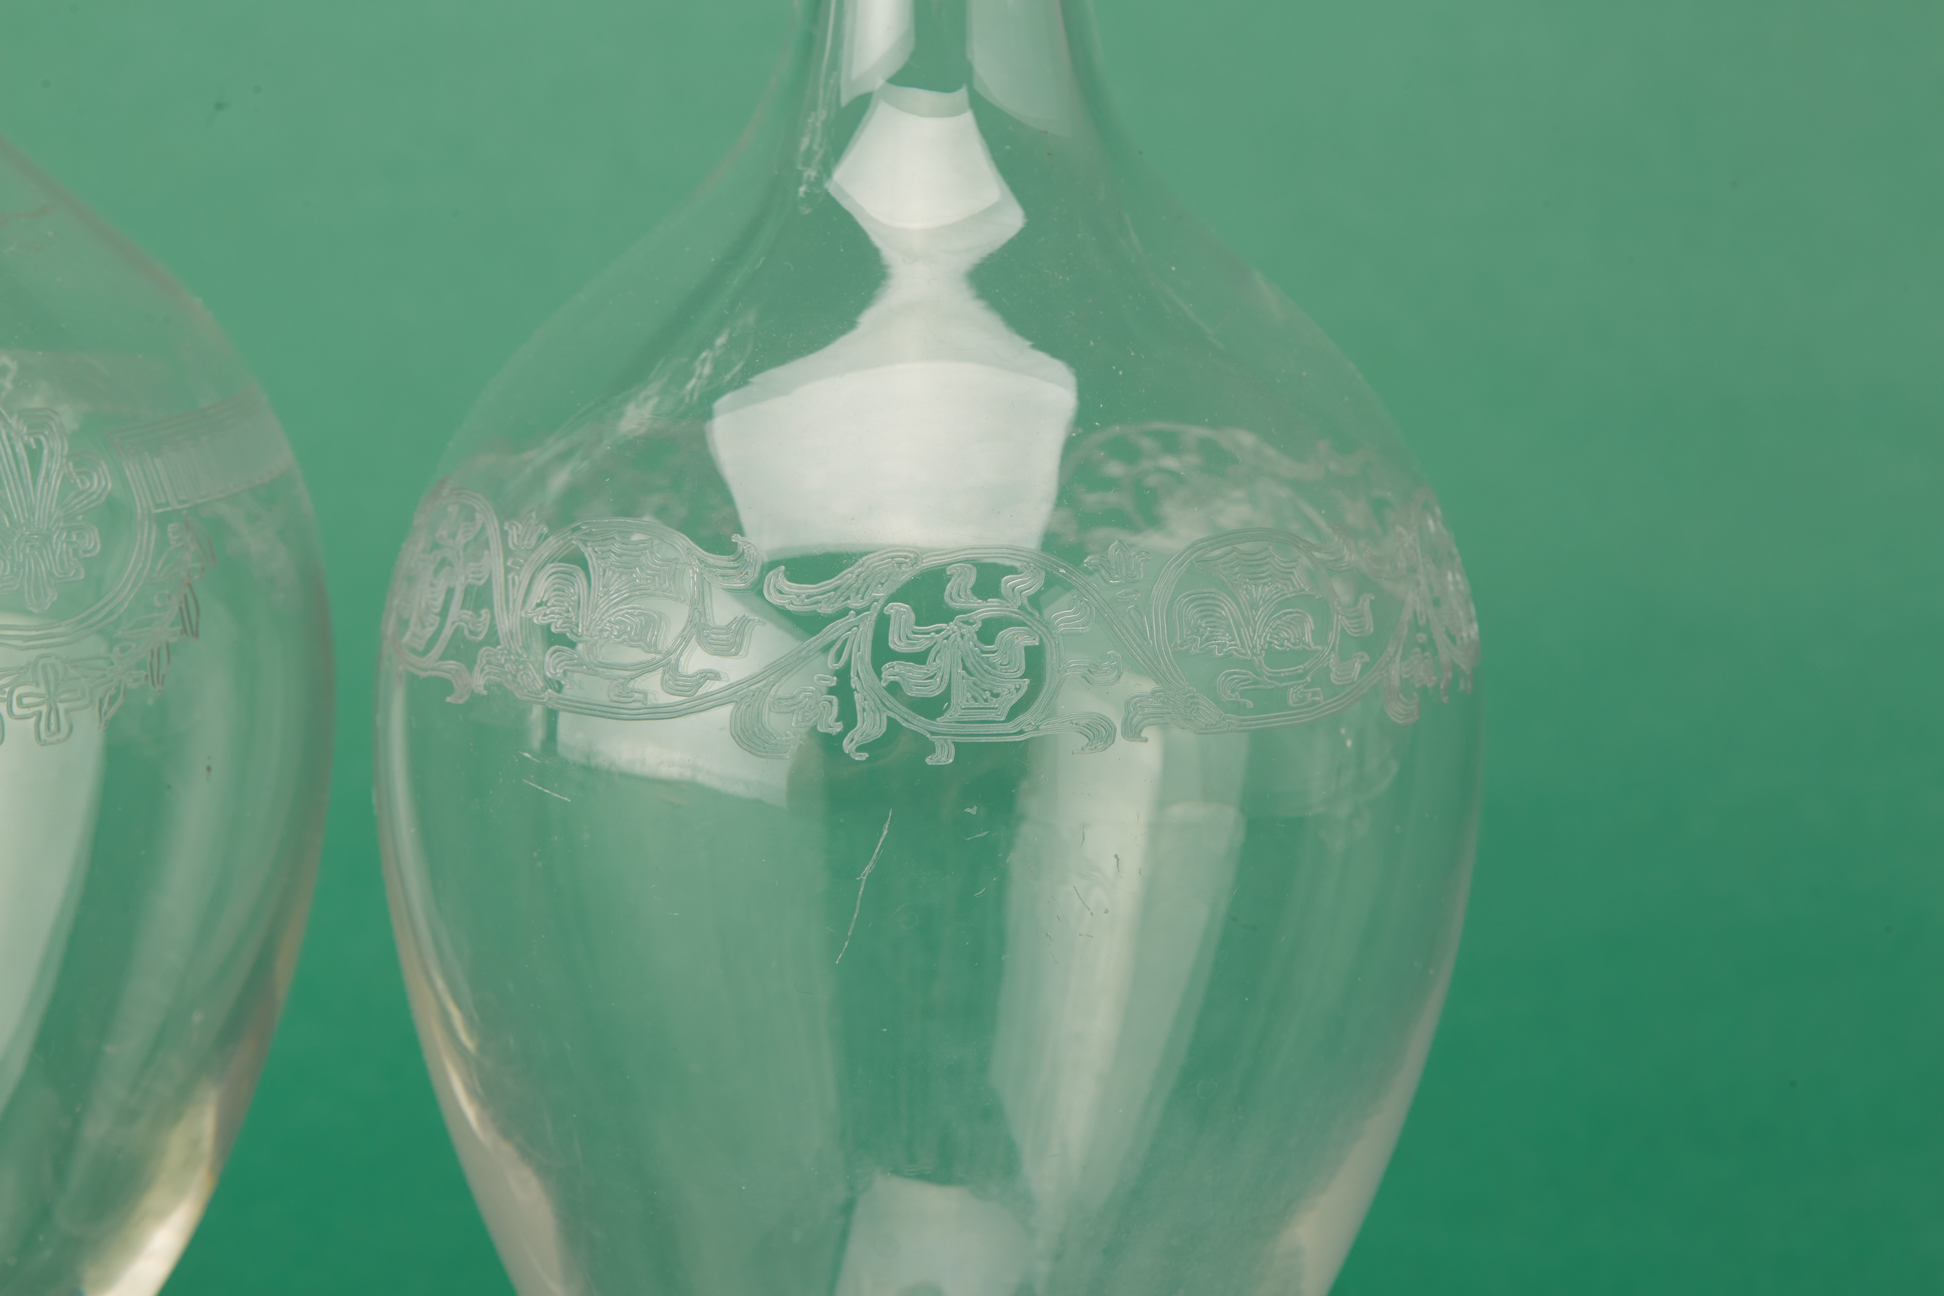 TWO FRENCH GLASS DECANTERS - Image 2 of 2